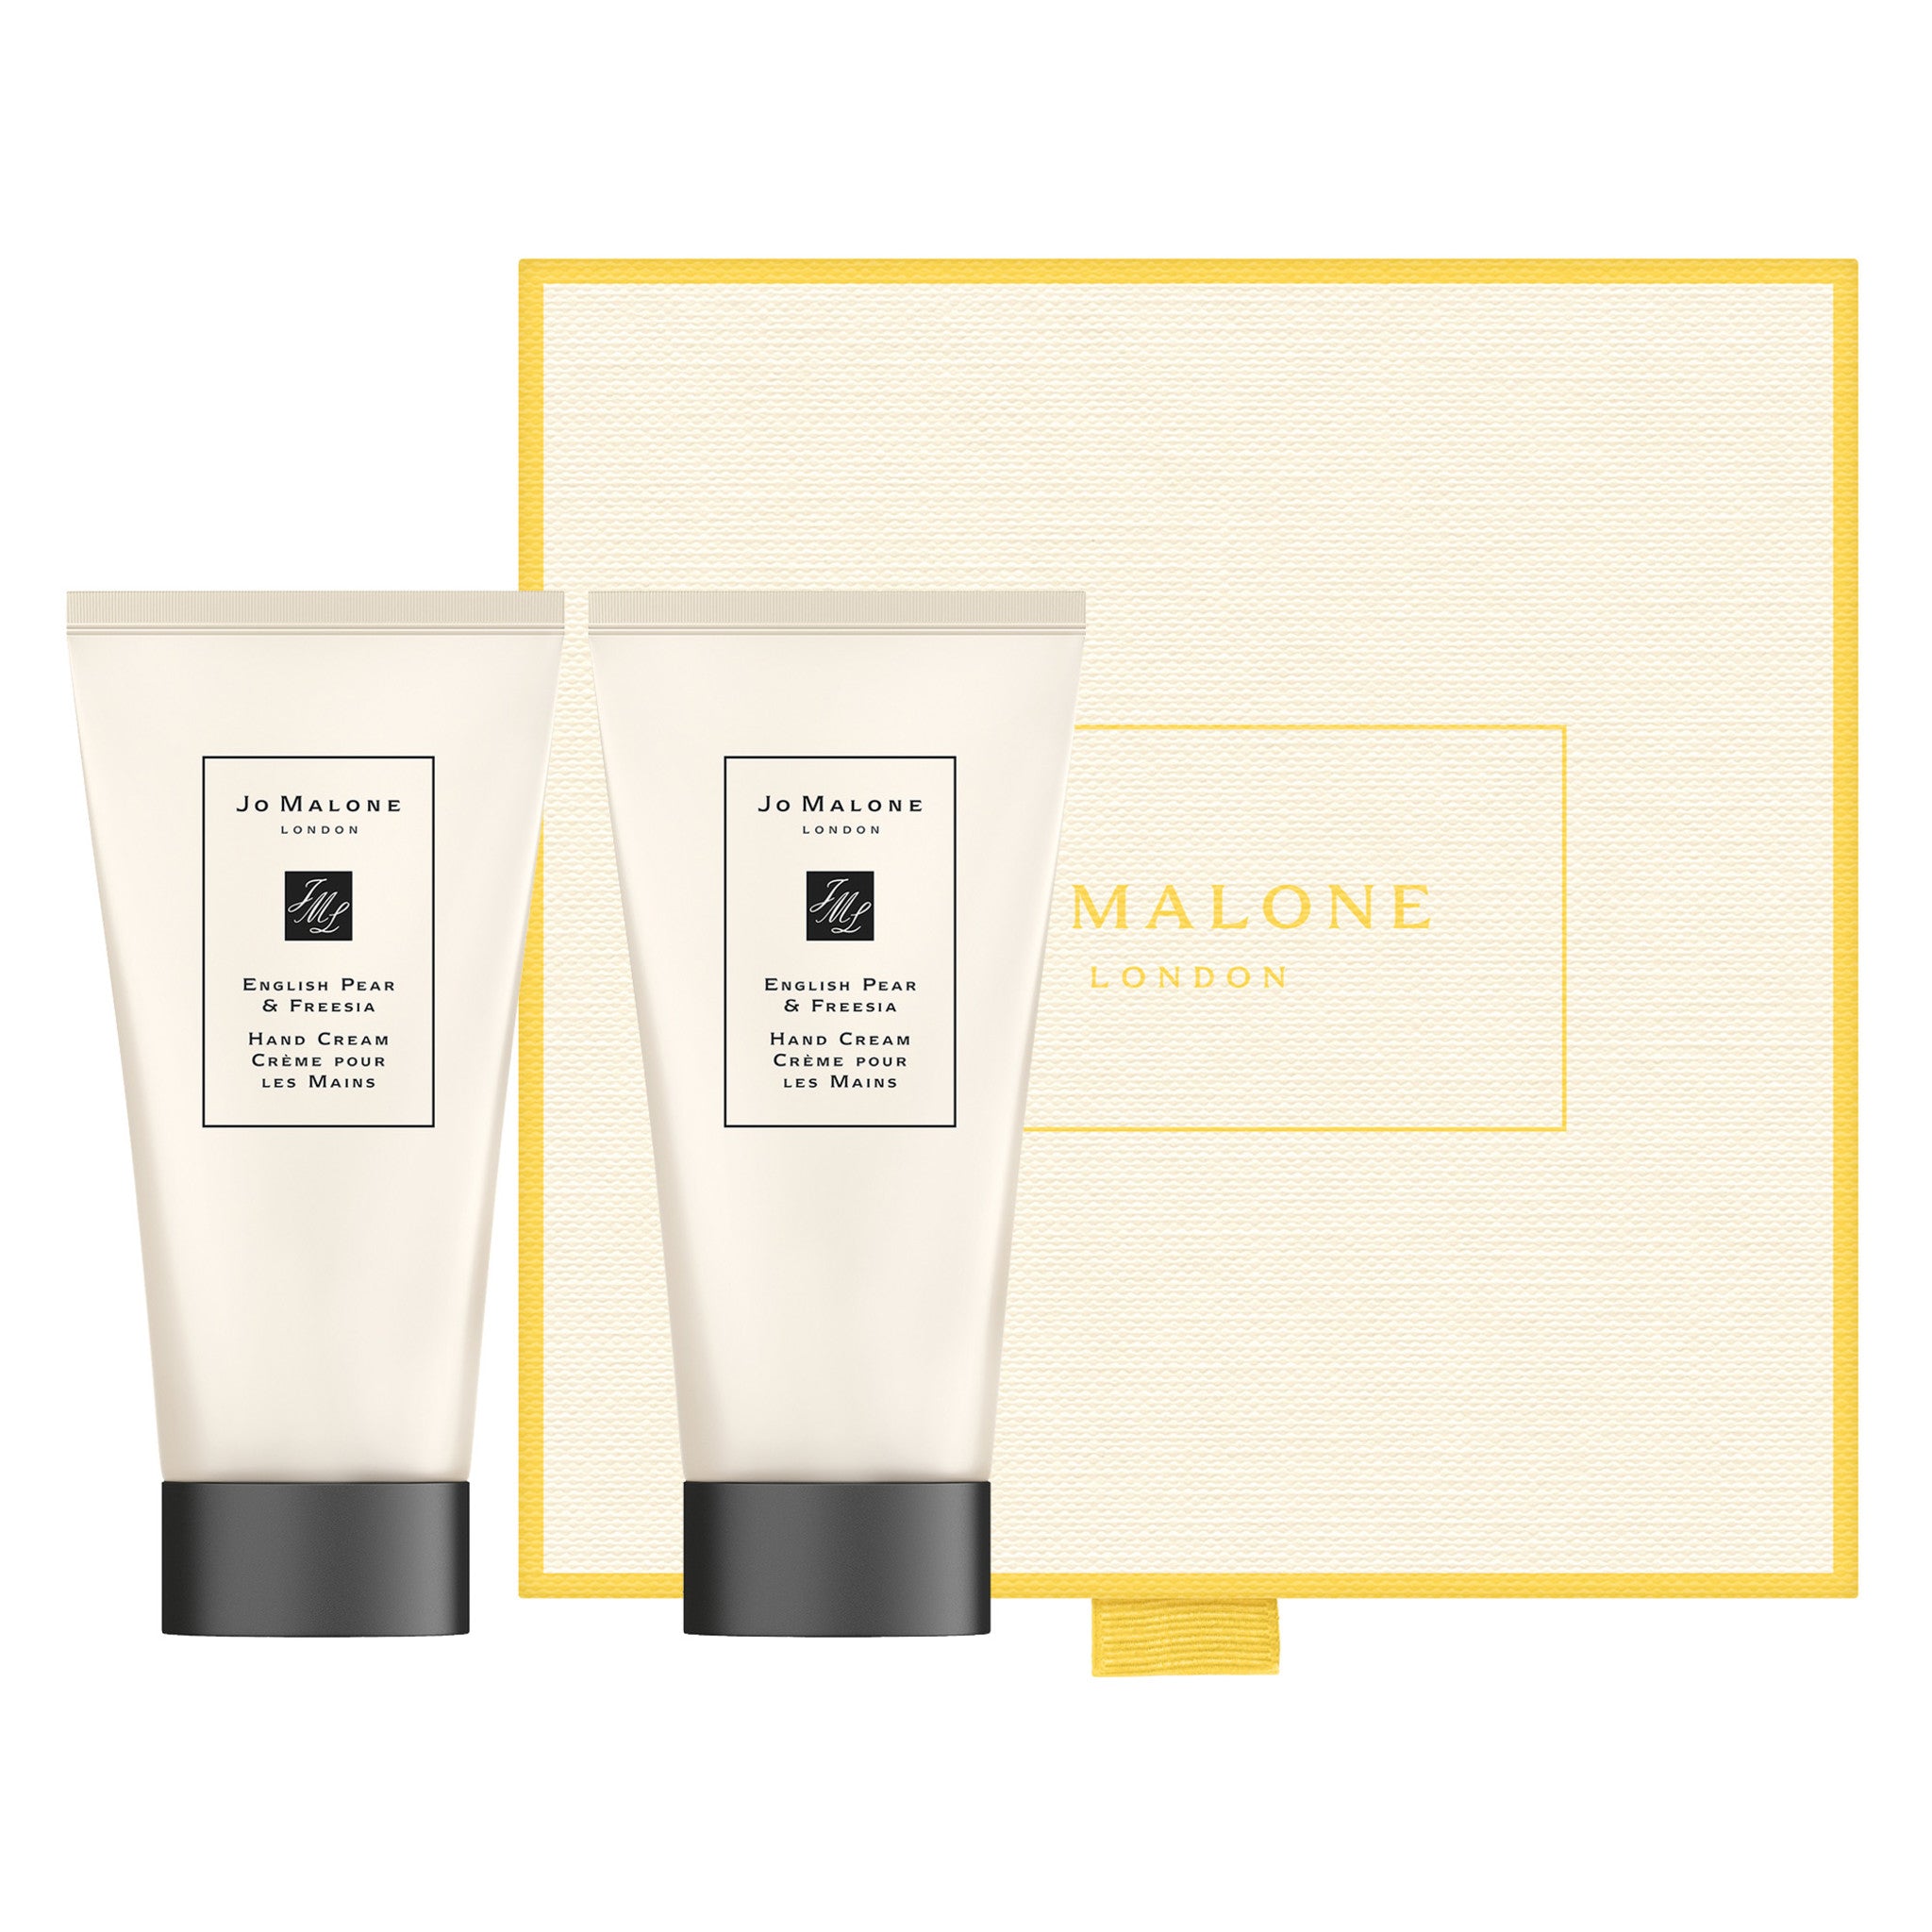 Jo Malone London Limited Edition English Pear & Freesia Hand Care Collection main image.